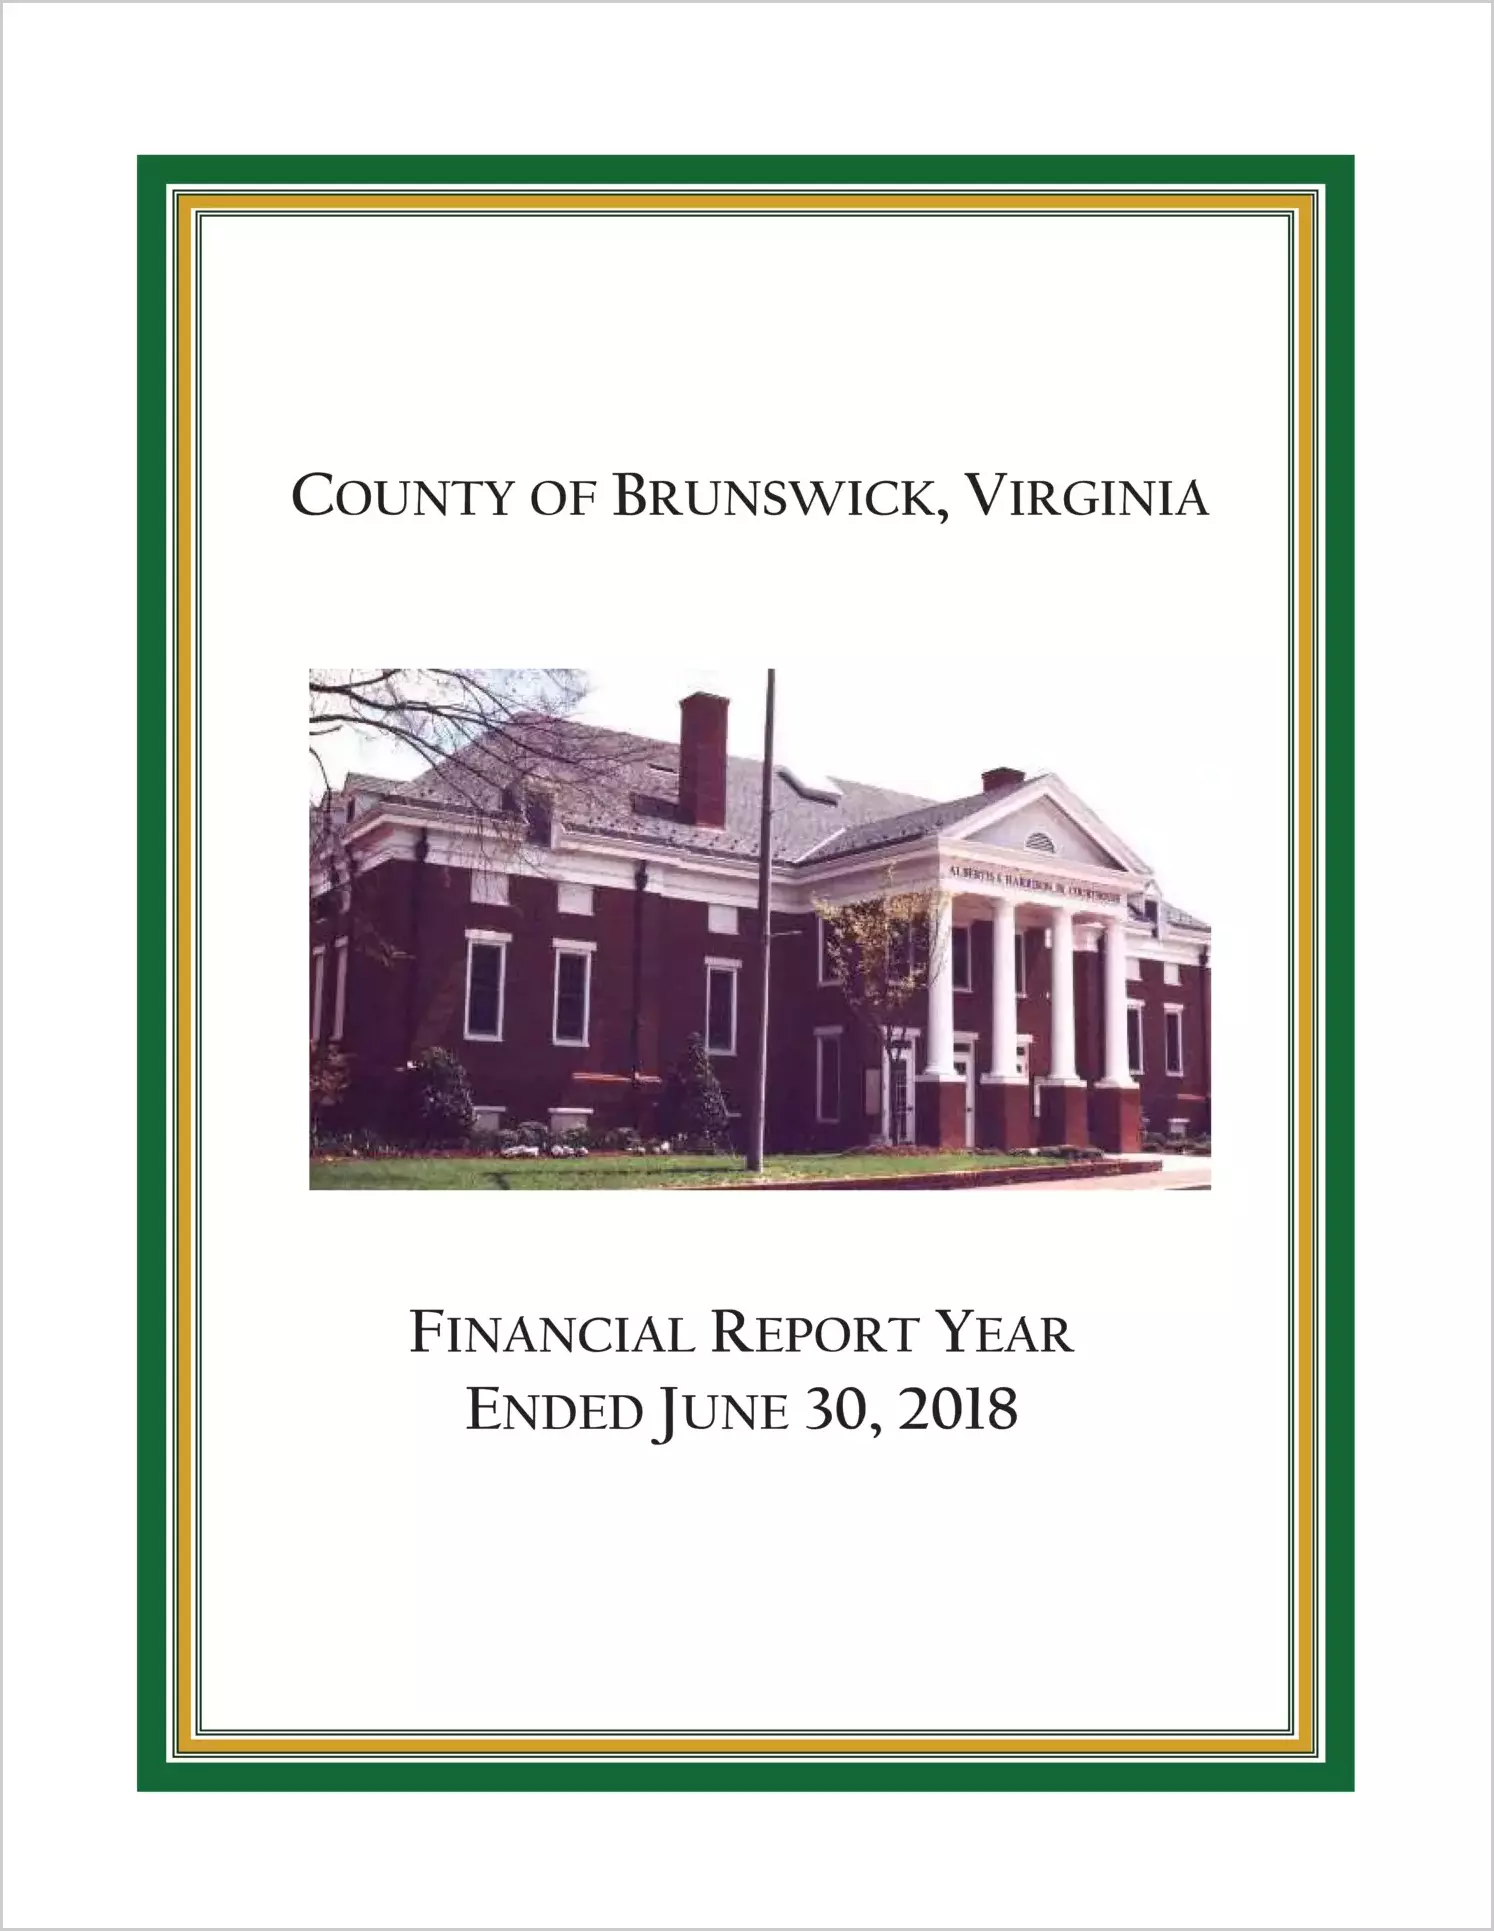 2018 Annual Financial Report for County of Brunswick